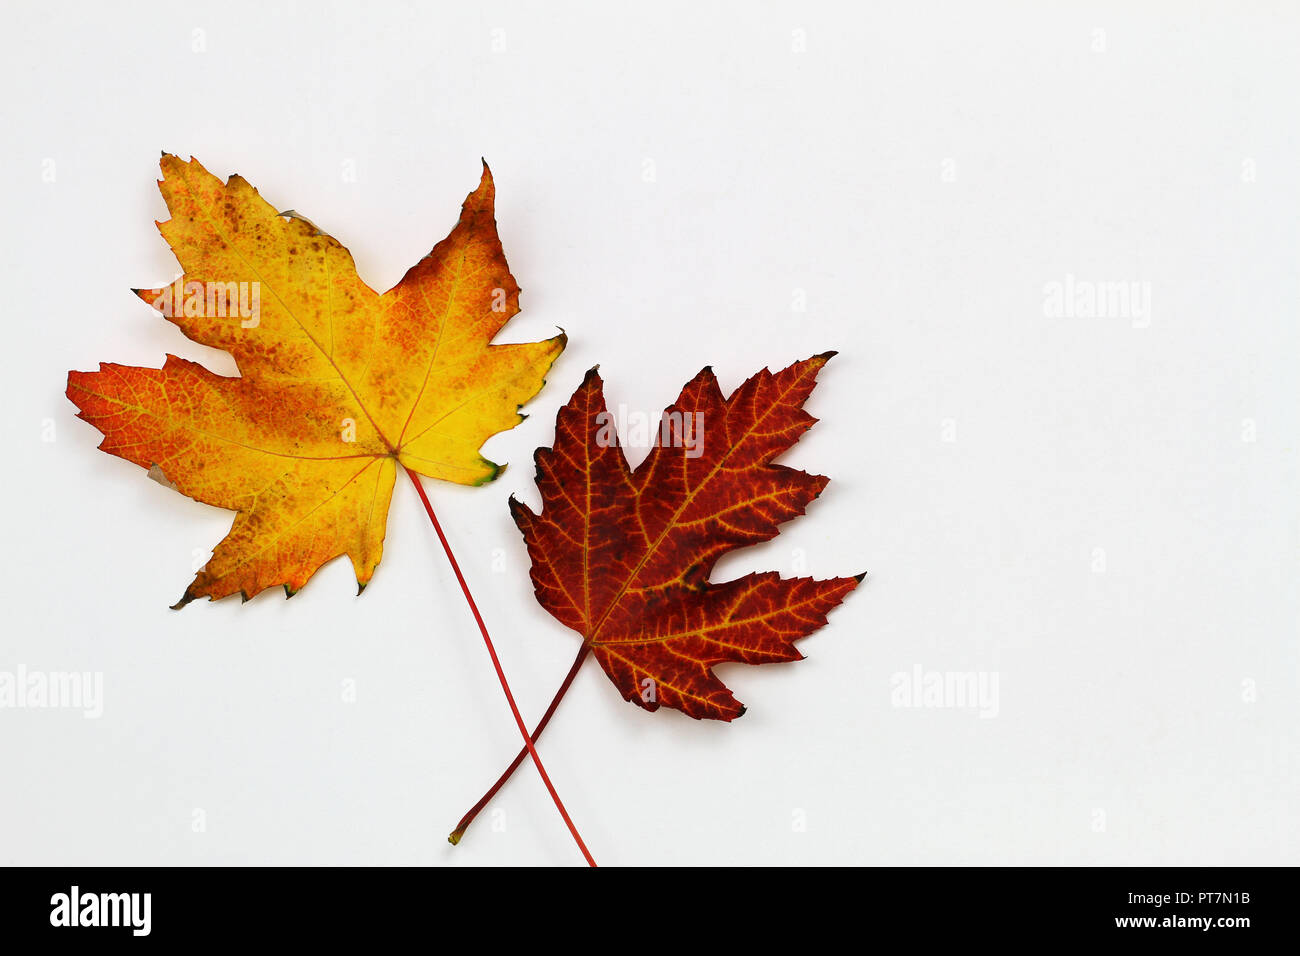 Two colorful autumn maple leaves on white surface with copy space Stock Photo